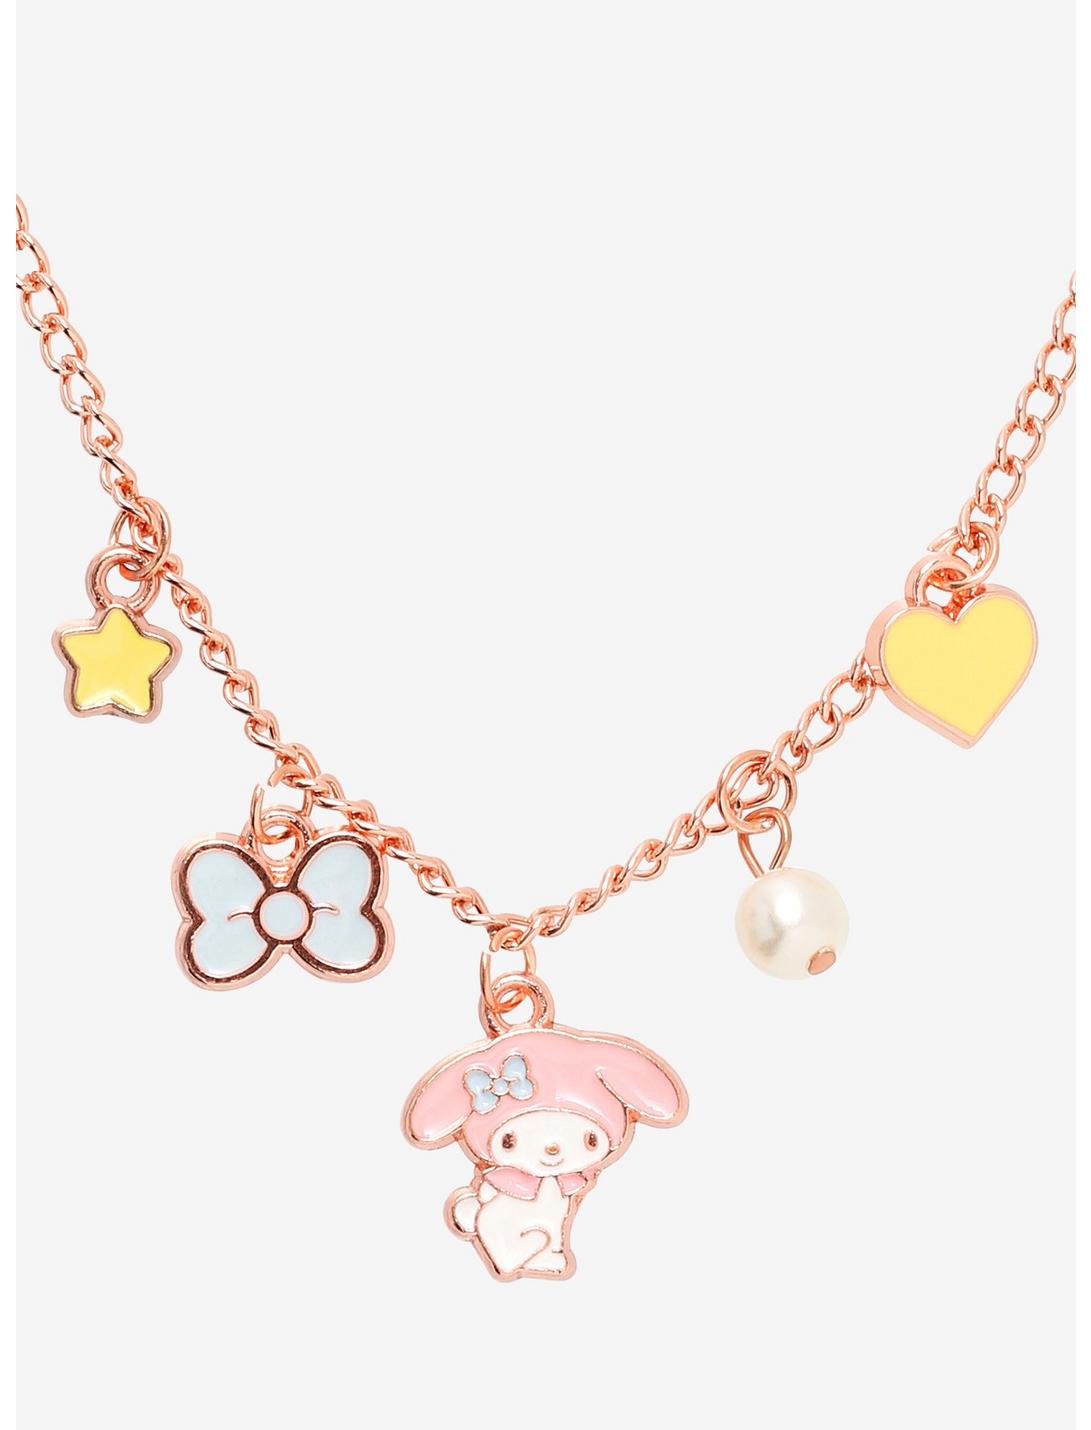 My Melody Rose Gold Charm Necklace, , hi-res